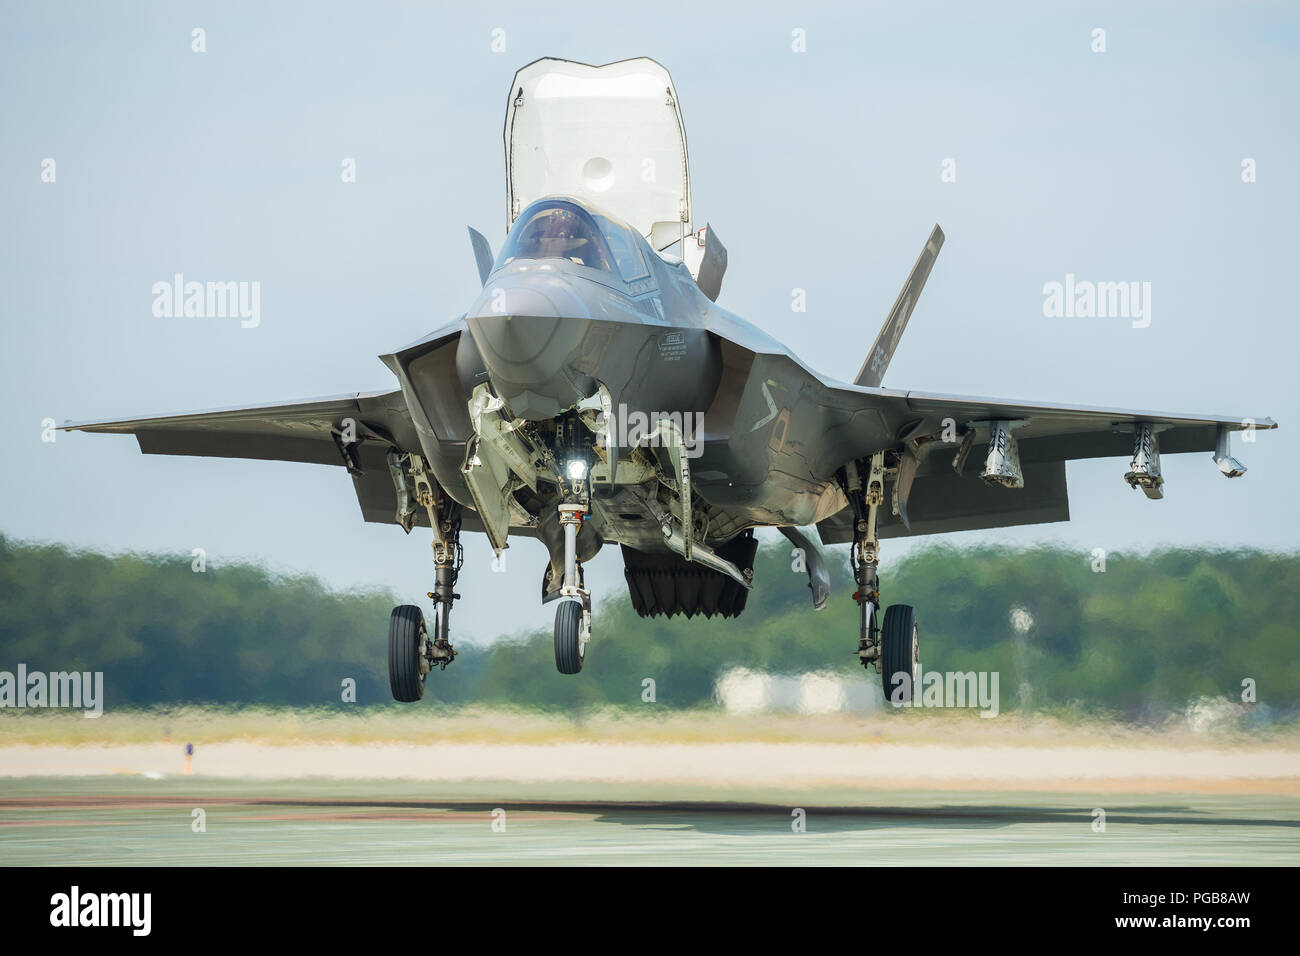 U.S. Marine Corps Maj. Michael Lippert, F-35 Pax River ITF test pilot, completes an vertical landing at Naval Air Station Patuxent River, Maryland, Aug. 16, 2018, as part of the Queen Elizabeth workups in preparation for the First of Class Flight Trials (Fixed Wing) aboard Britain’s newest aircraft carrier, HMS Queen Elizabeth.   Lippert, along with ITF pilots Royal Navy Cdr. Nathan Gray, Royal Air Force Sqn. Ldr. Andy Edgell and BAE Systems Peter Wilson, and nearly 200 ITF experts will embark with two F-35B test jets and several test equipment to evaluate the fifth-generation aircraft perform Stock Photo